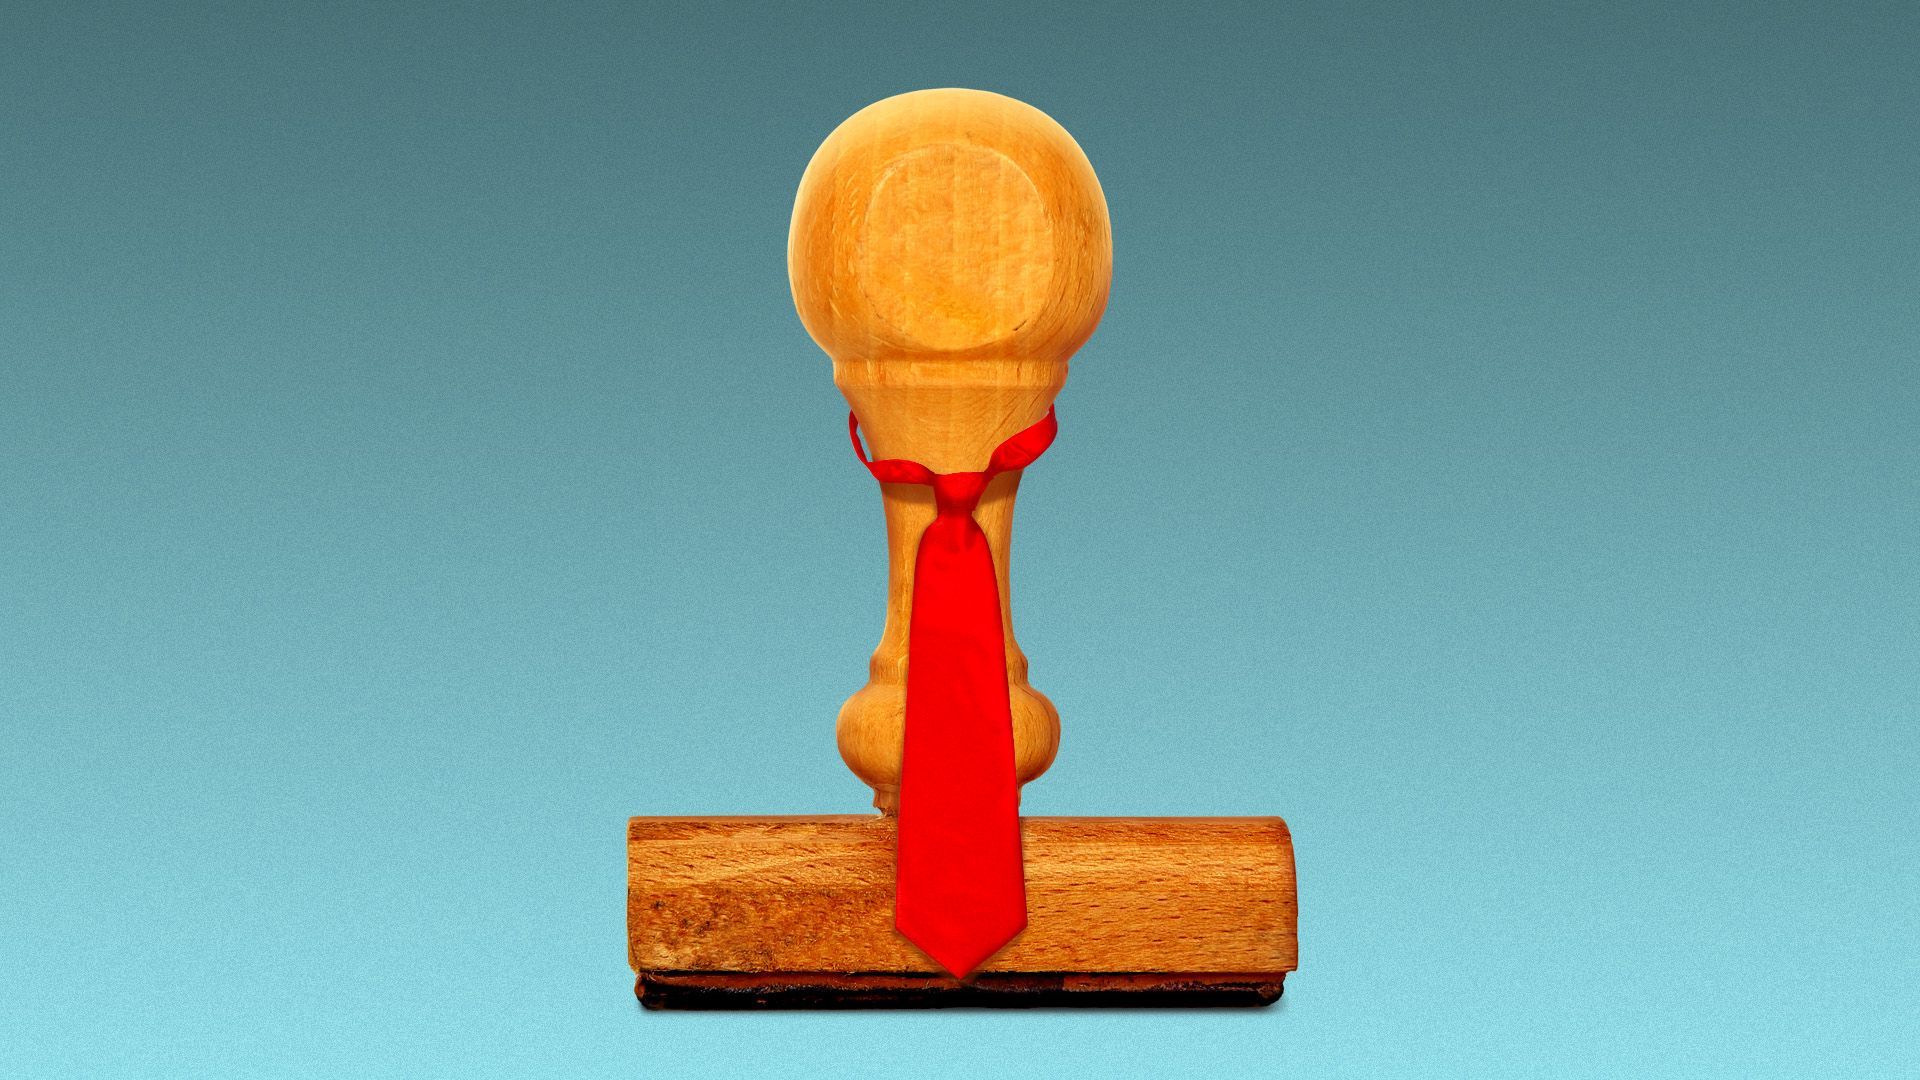 Illustration of a wooden rubber stamp wearing a red tie